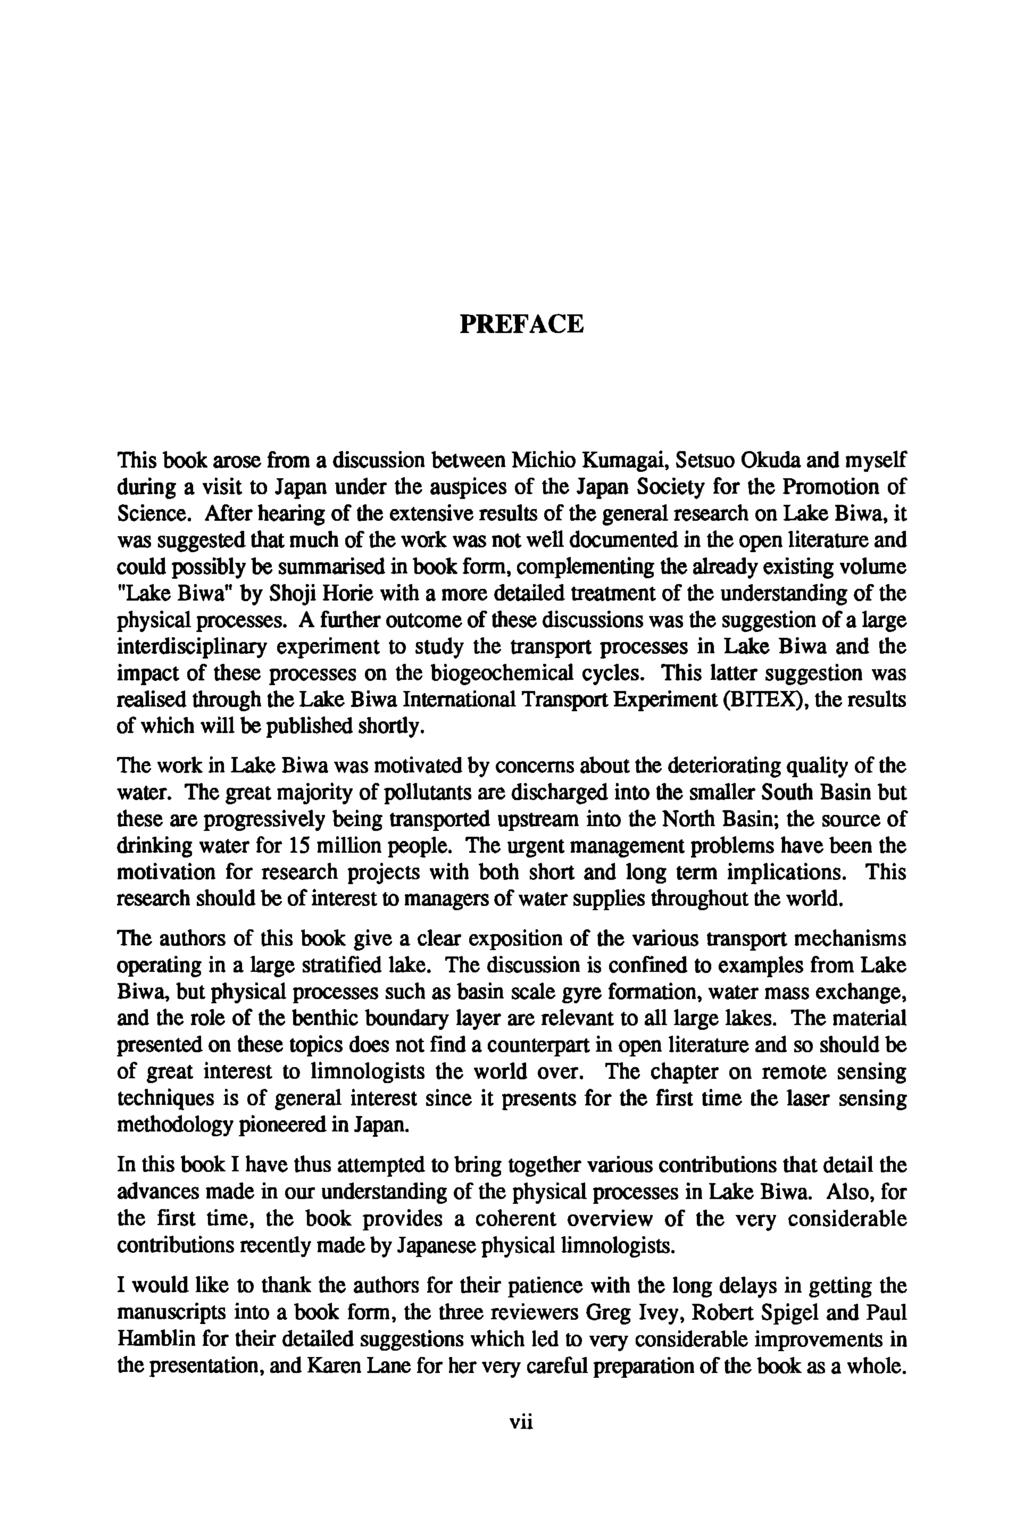 PREFACE This book arose from a discussion between Michio Kumagai, Setsuo Okuda and myself during a visit to Japan under the auspices of the Japan Society for the Promotion of Science.